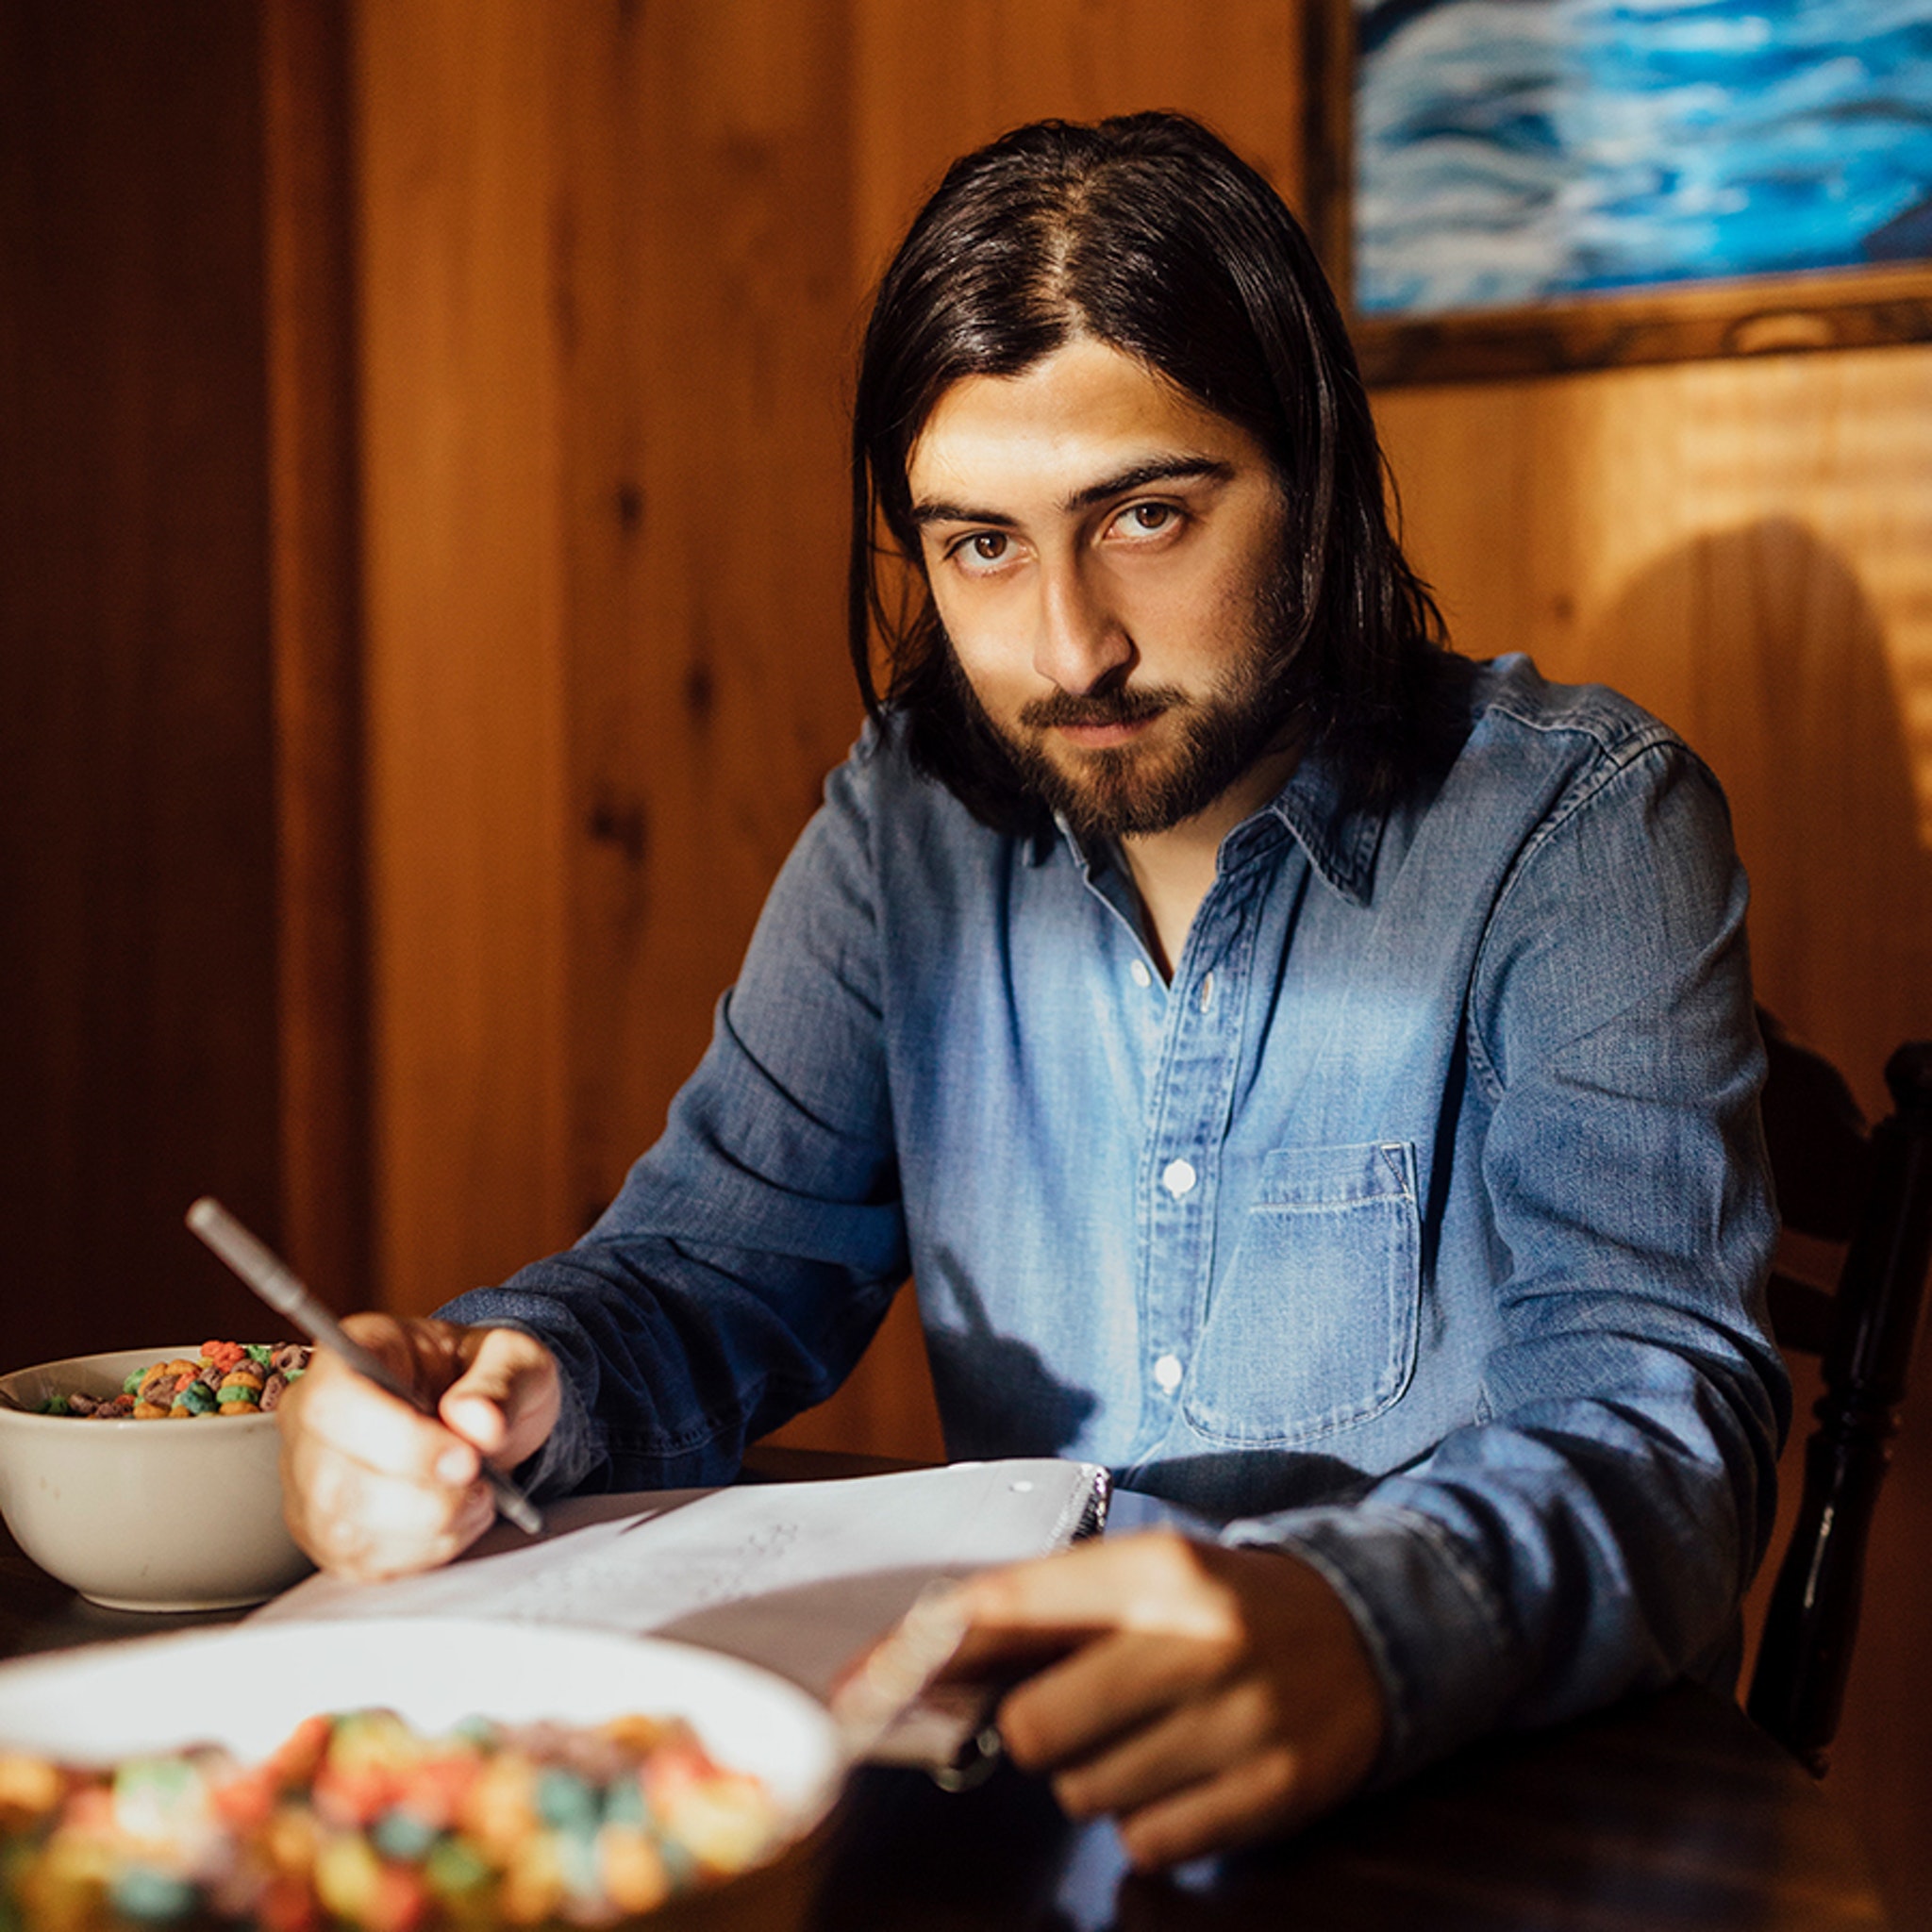 Noah Kahan sitting at a table writing in a notebook while looking at the camera.